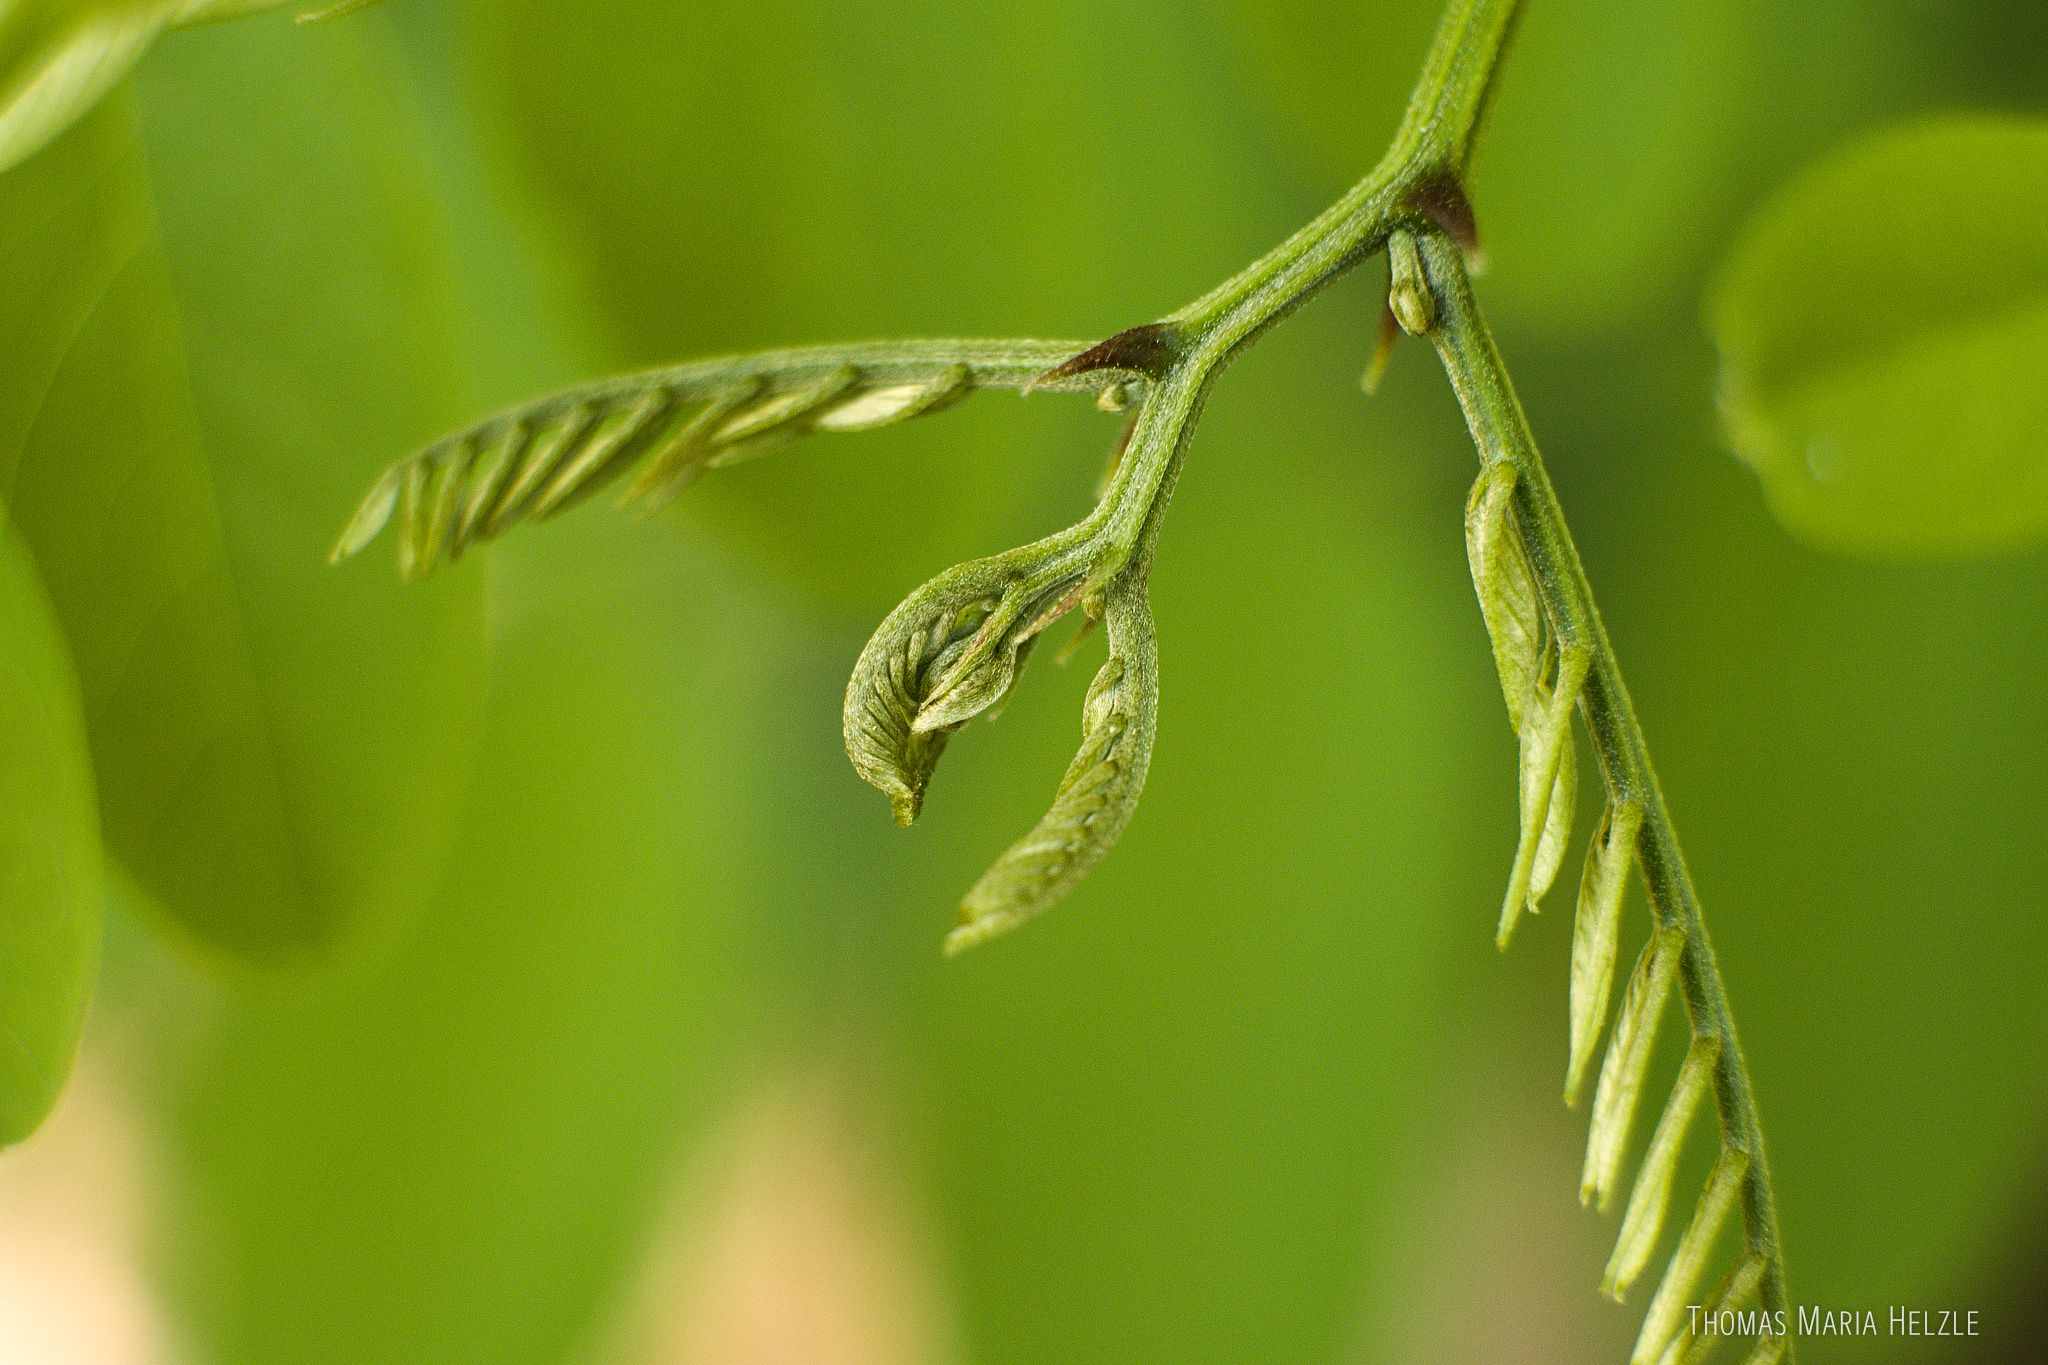 A yellow locust tree leaf unfolds itself like a fractal in spring in this macro shot in front of a blurred green background.